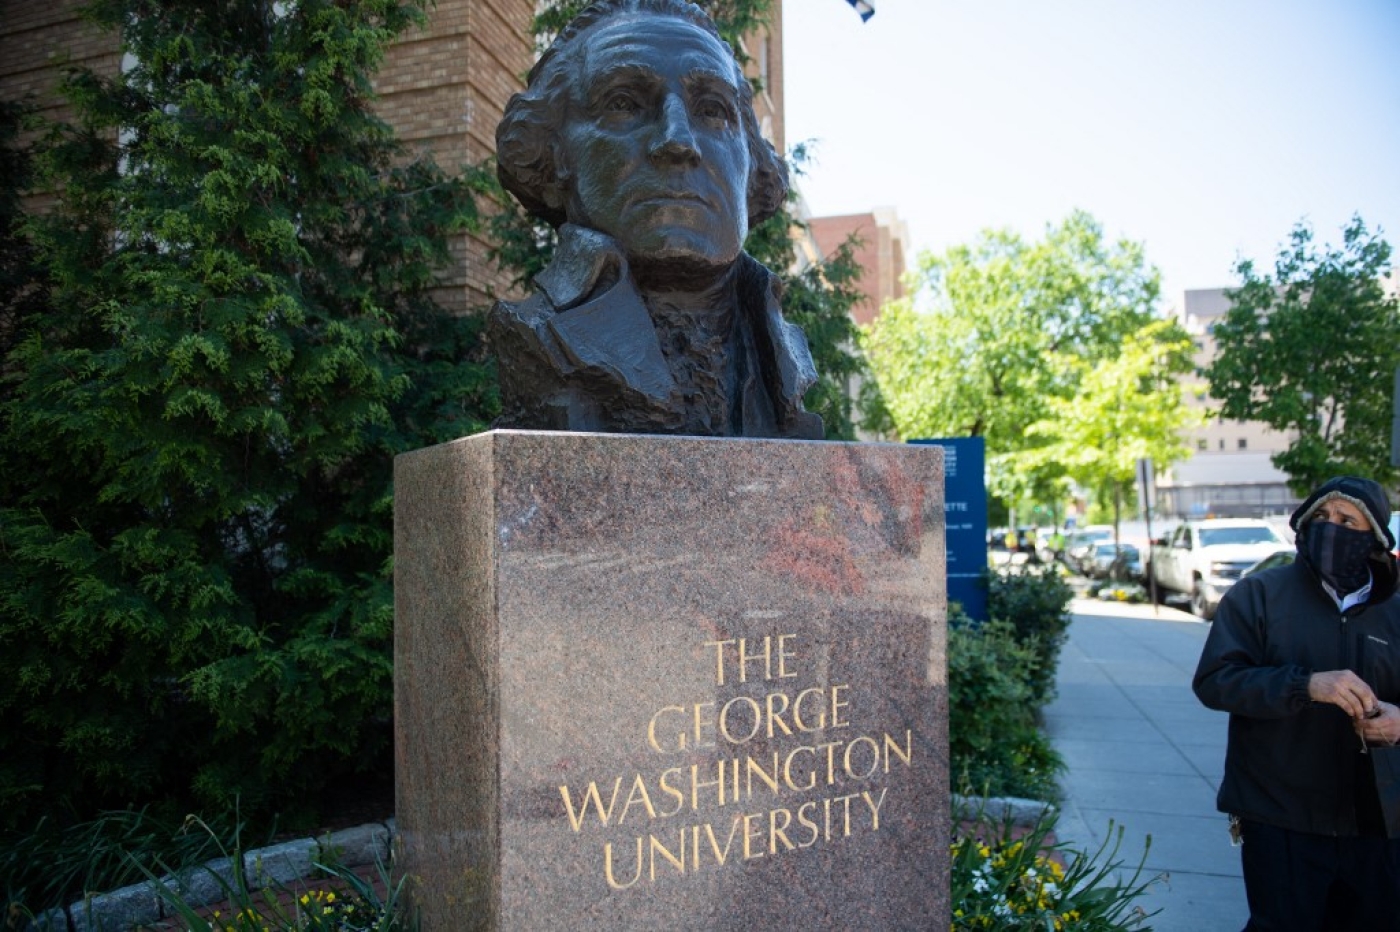 George Washington University has previously been criticised for anti-Palestinian discrimination.